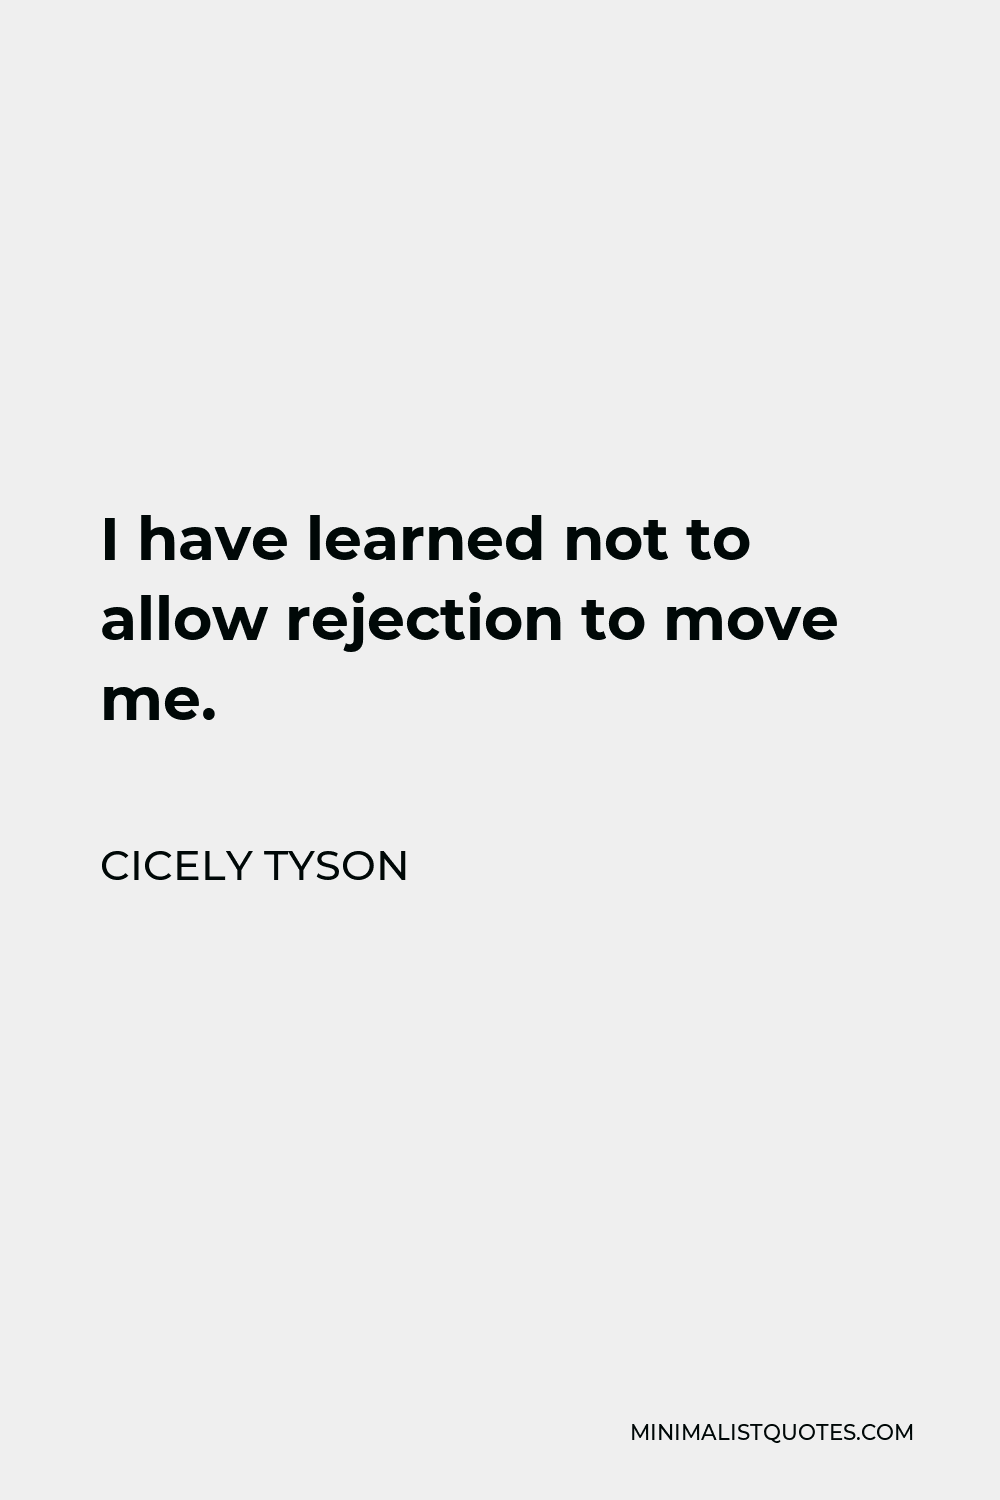 Cicely Tyson Quote - I have learned not to allow rejection to move me.